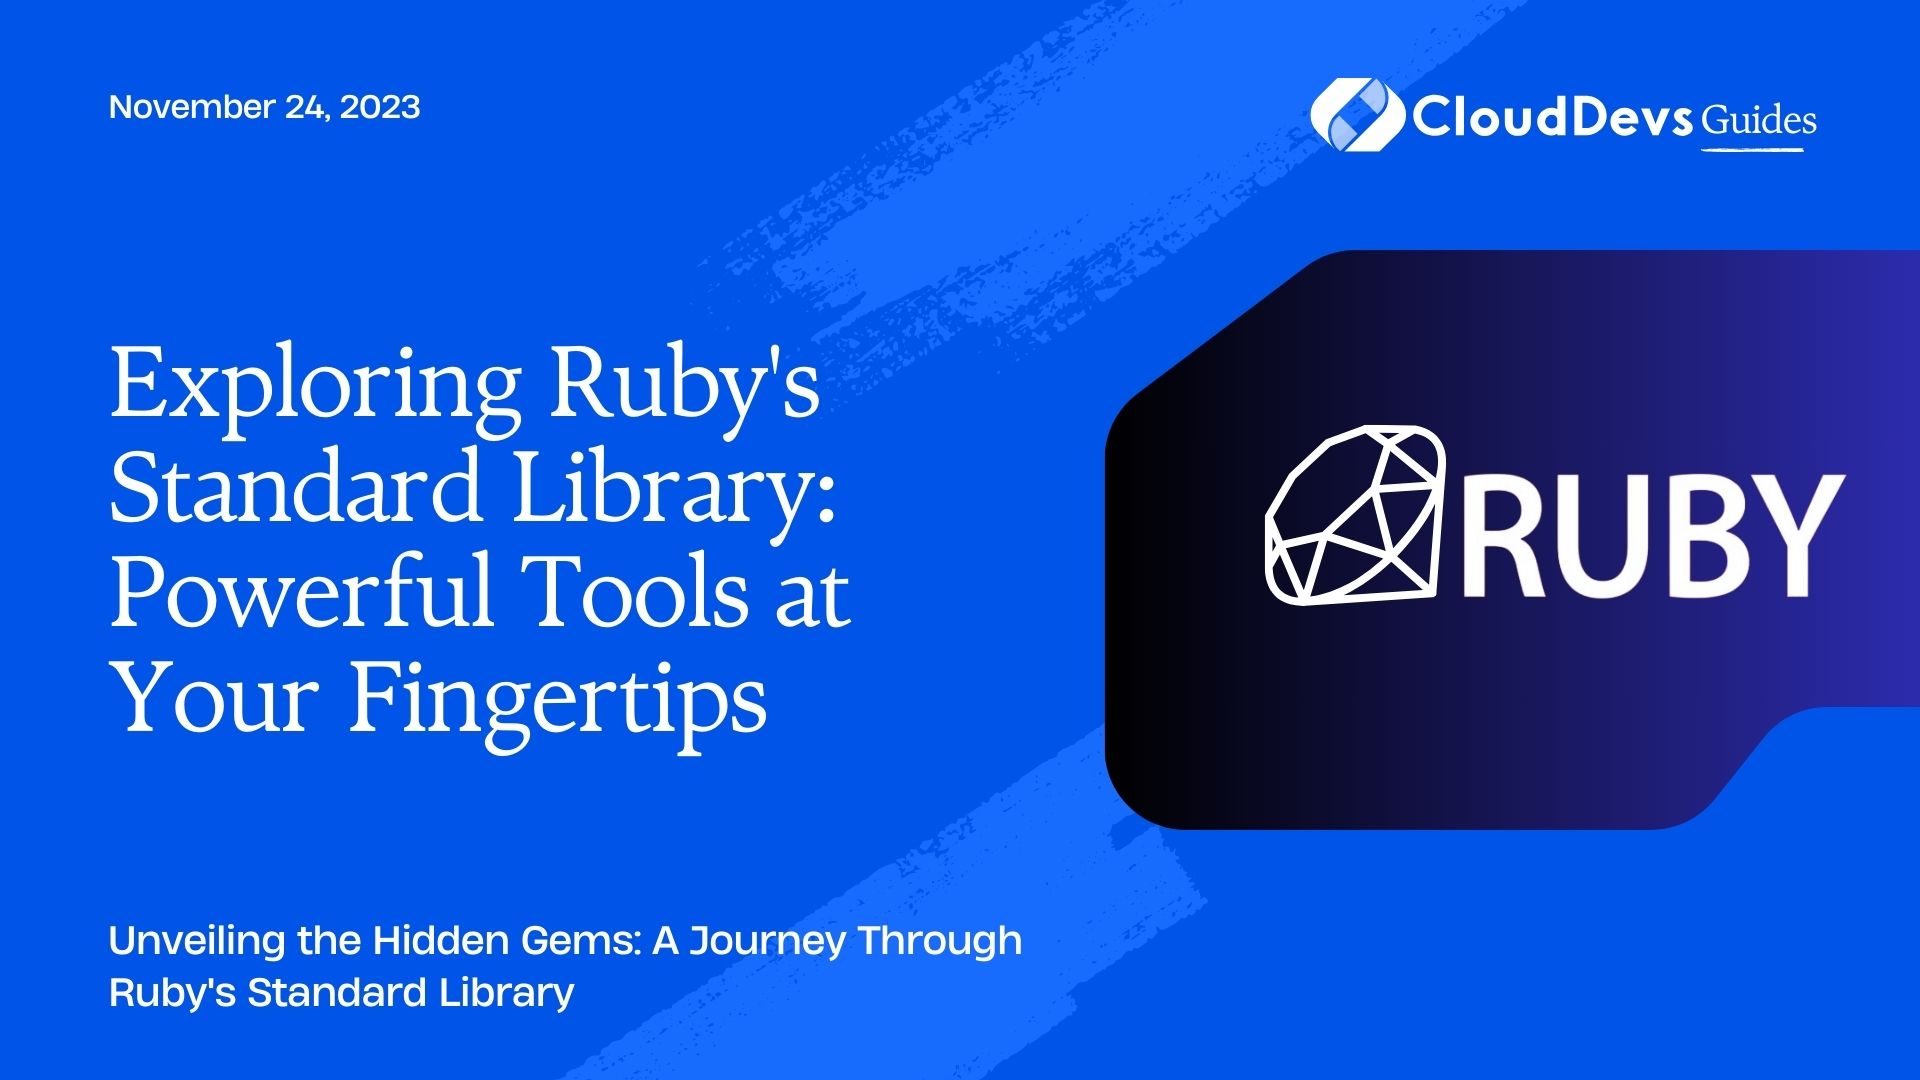 Exploring Ruby's Standard Library: Powerful Tools at Your Fingertips